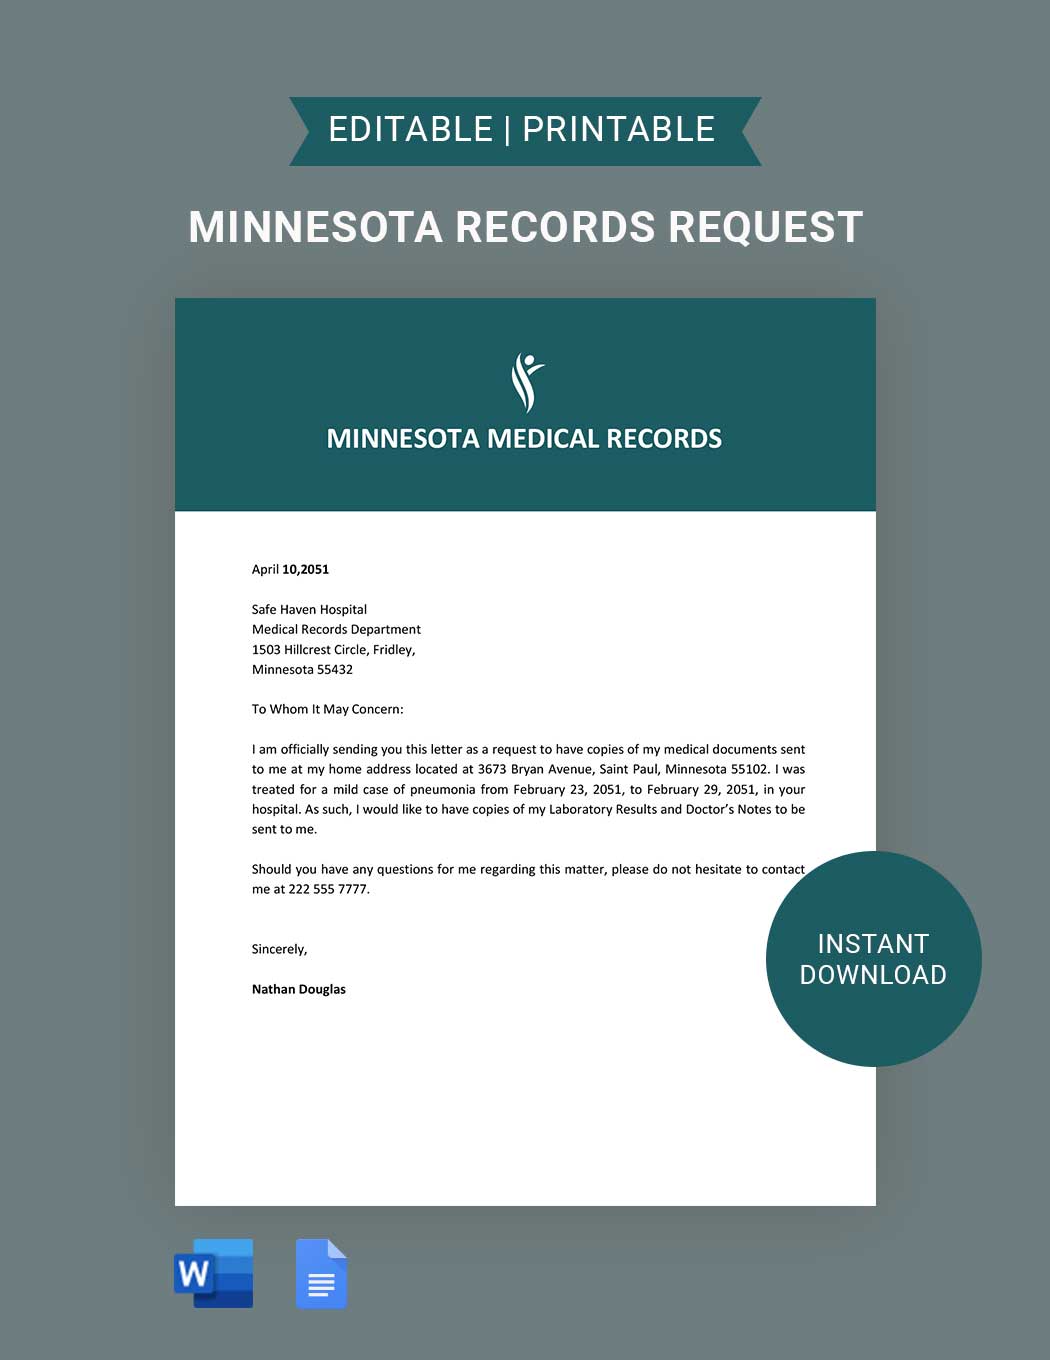 Minnesota Medical Records Request Template in Word, Google Docs